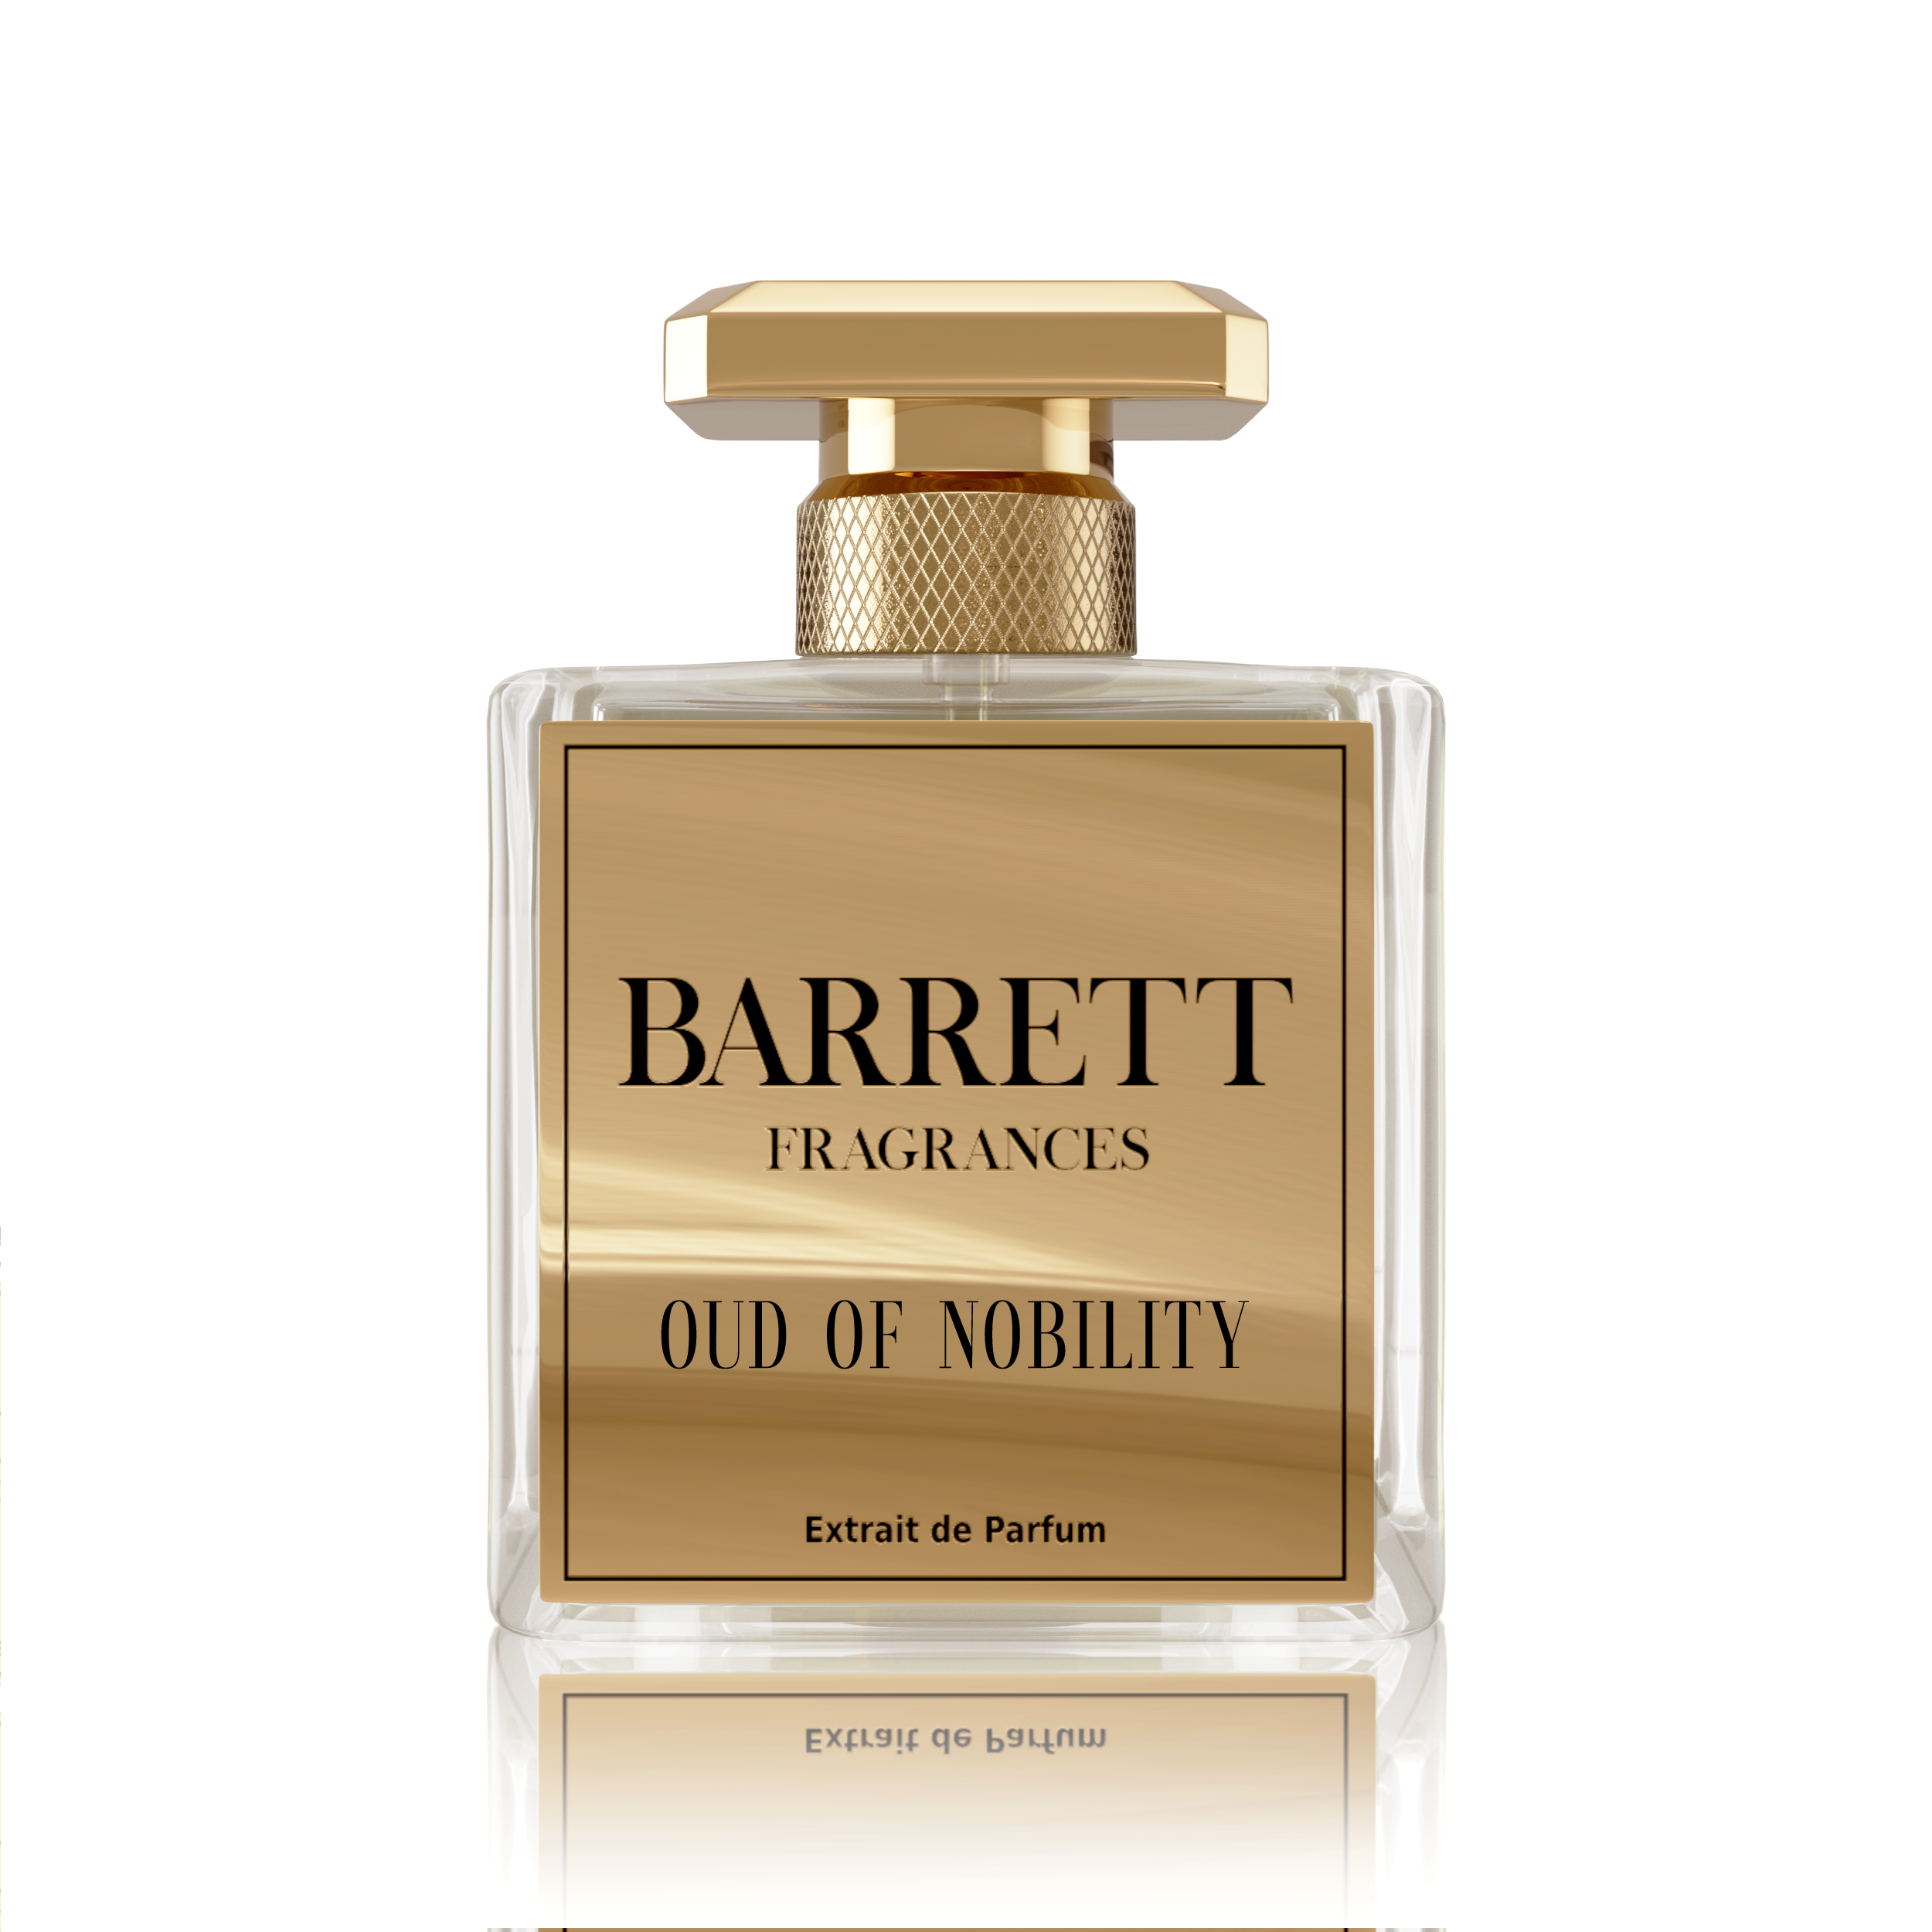 Oud of Nobility inspired by Royal Oud